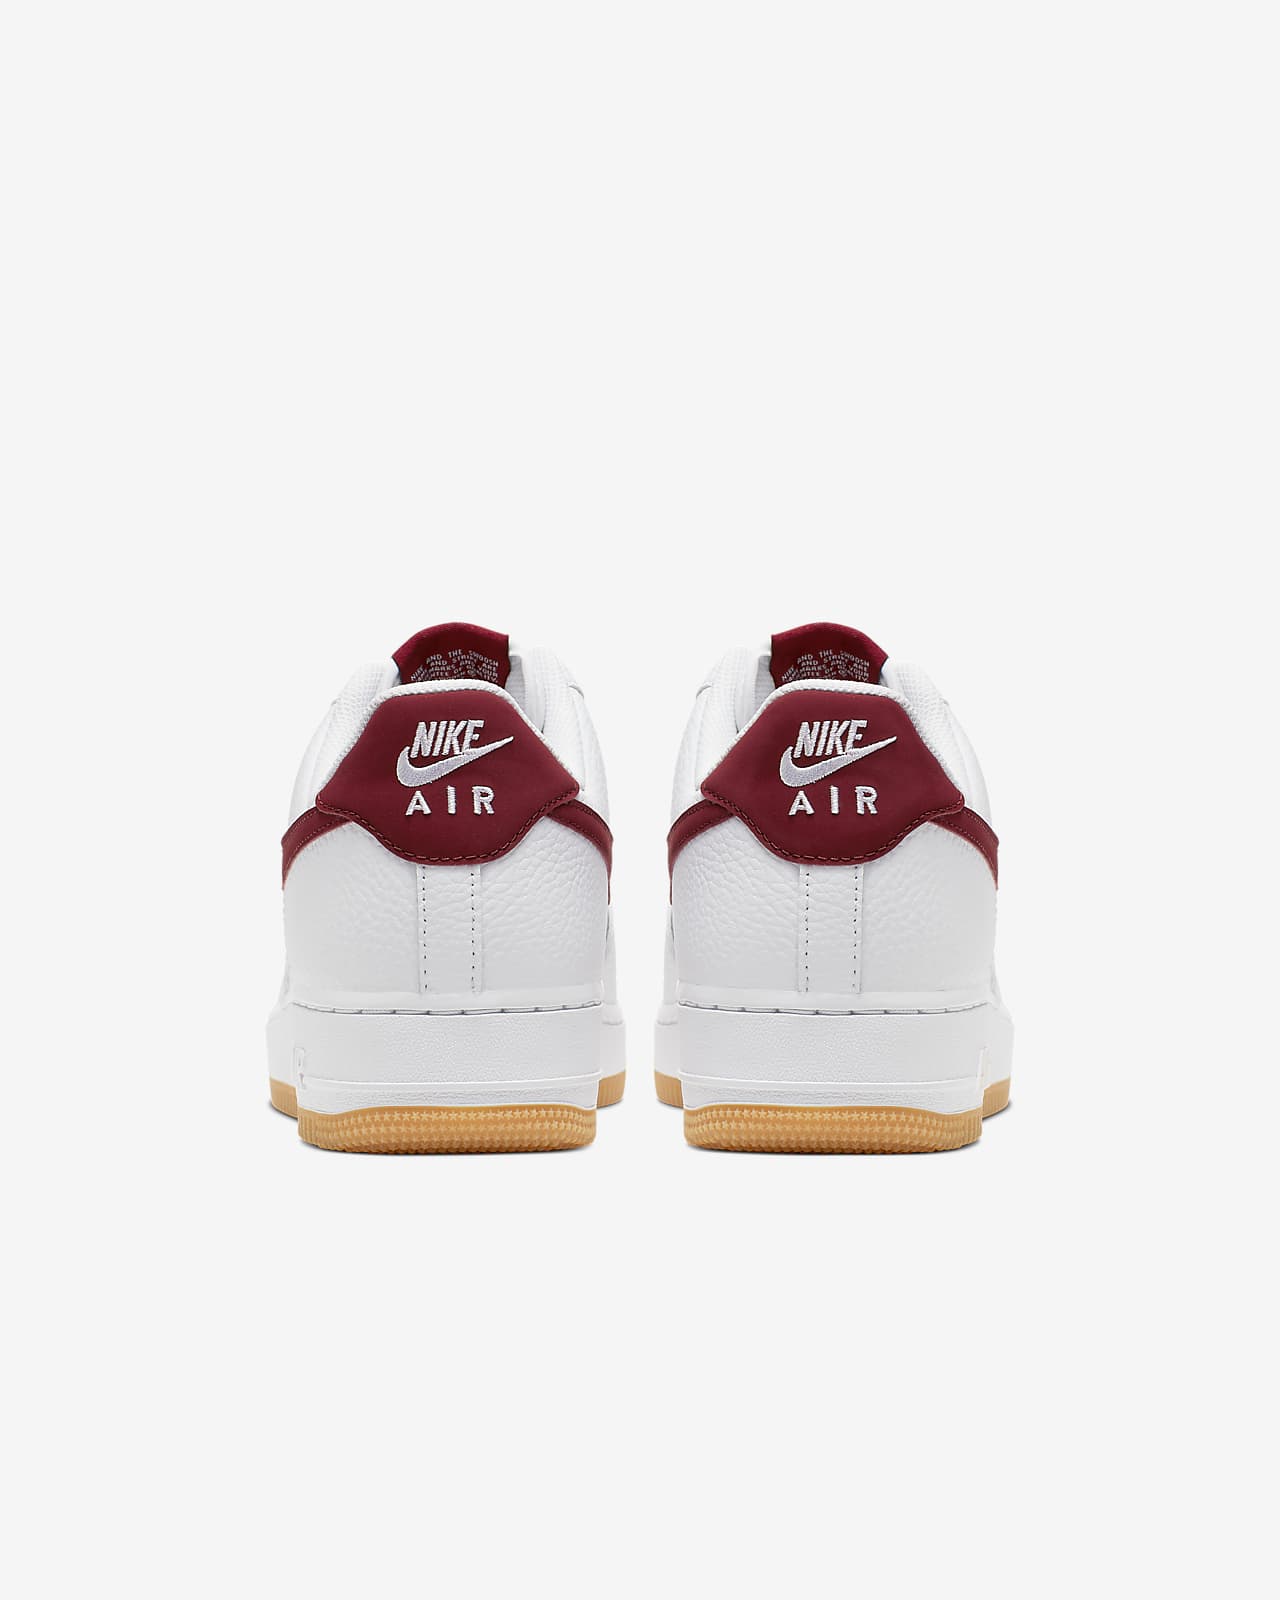 nike air force 1 low white/red/gum men's shoes